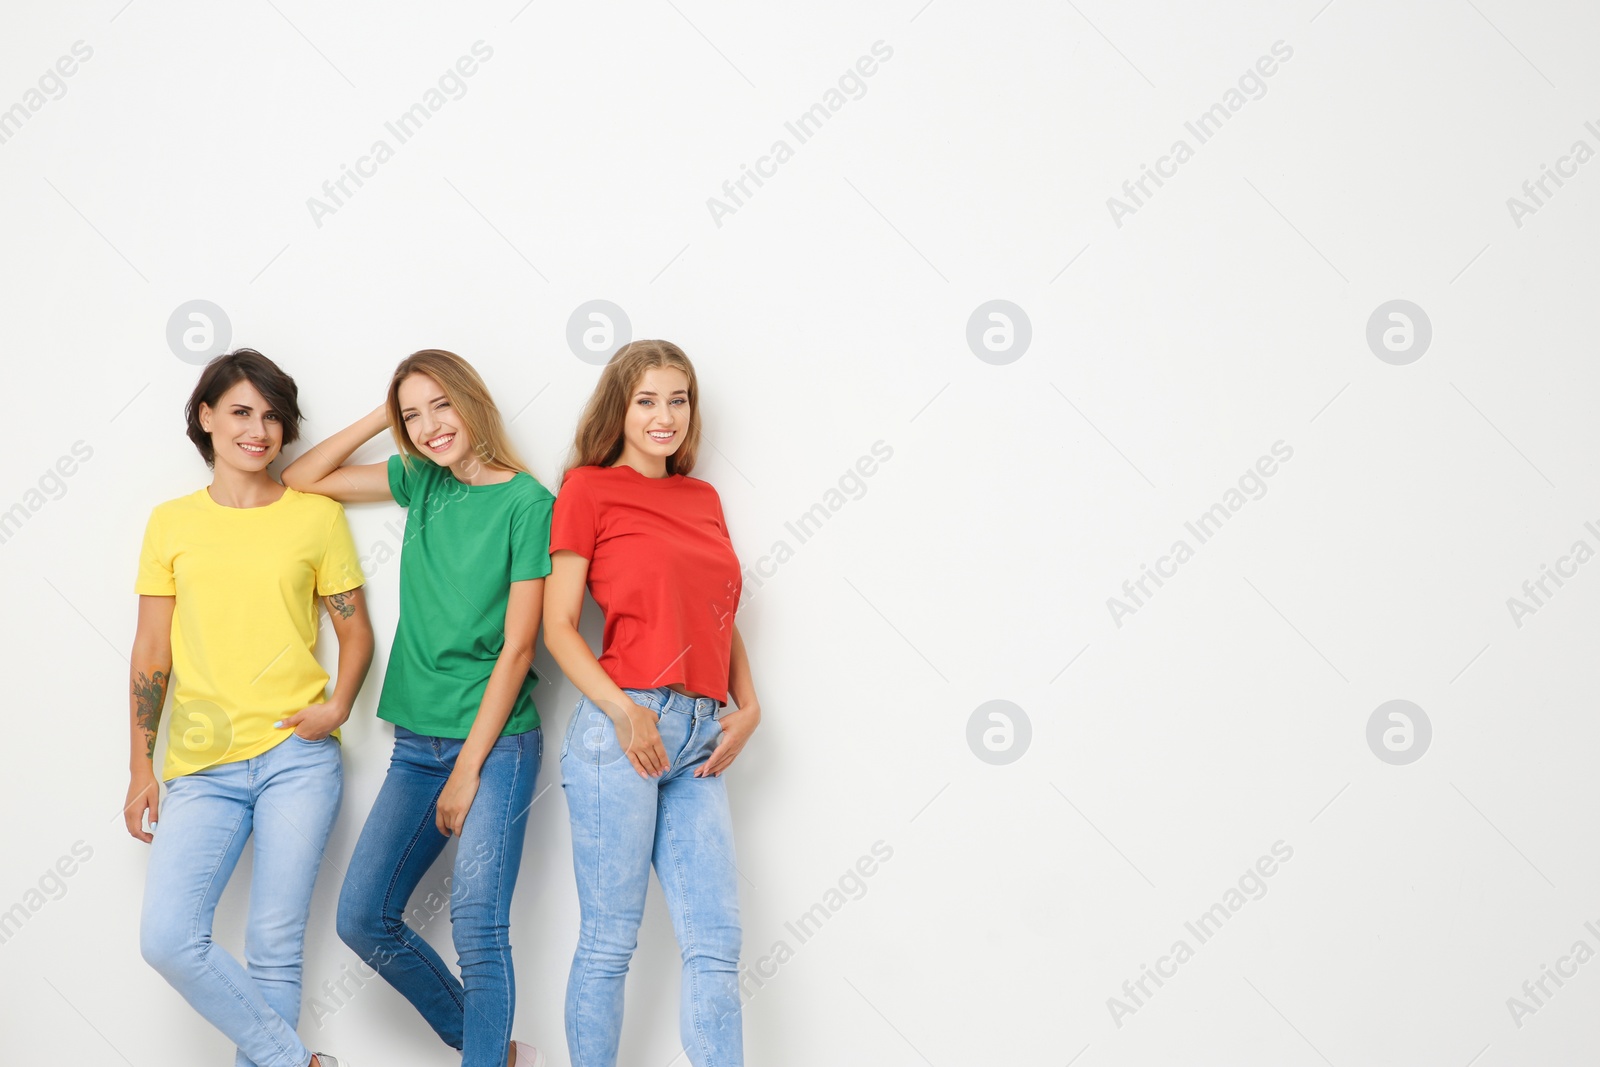 Photo of Group of young women in jeans and colorful t-shirts on light background